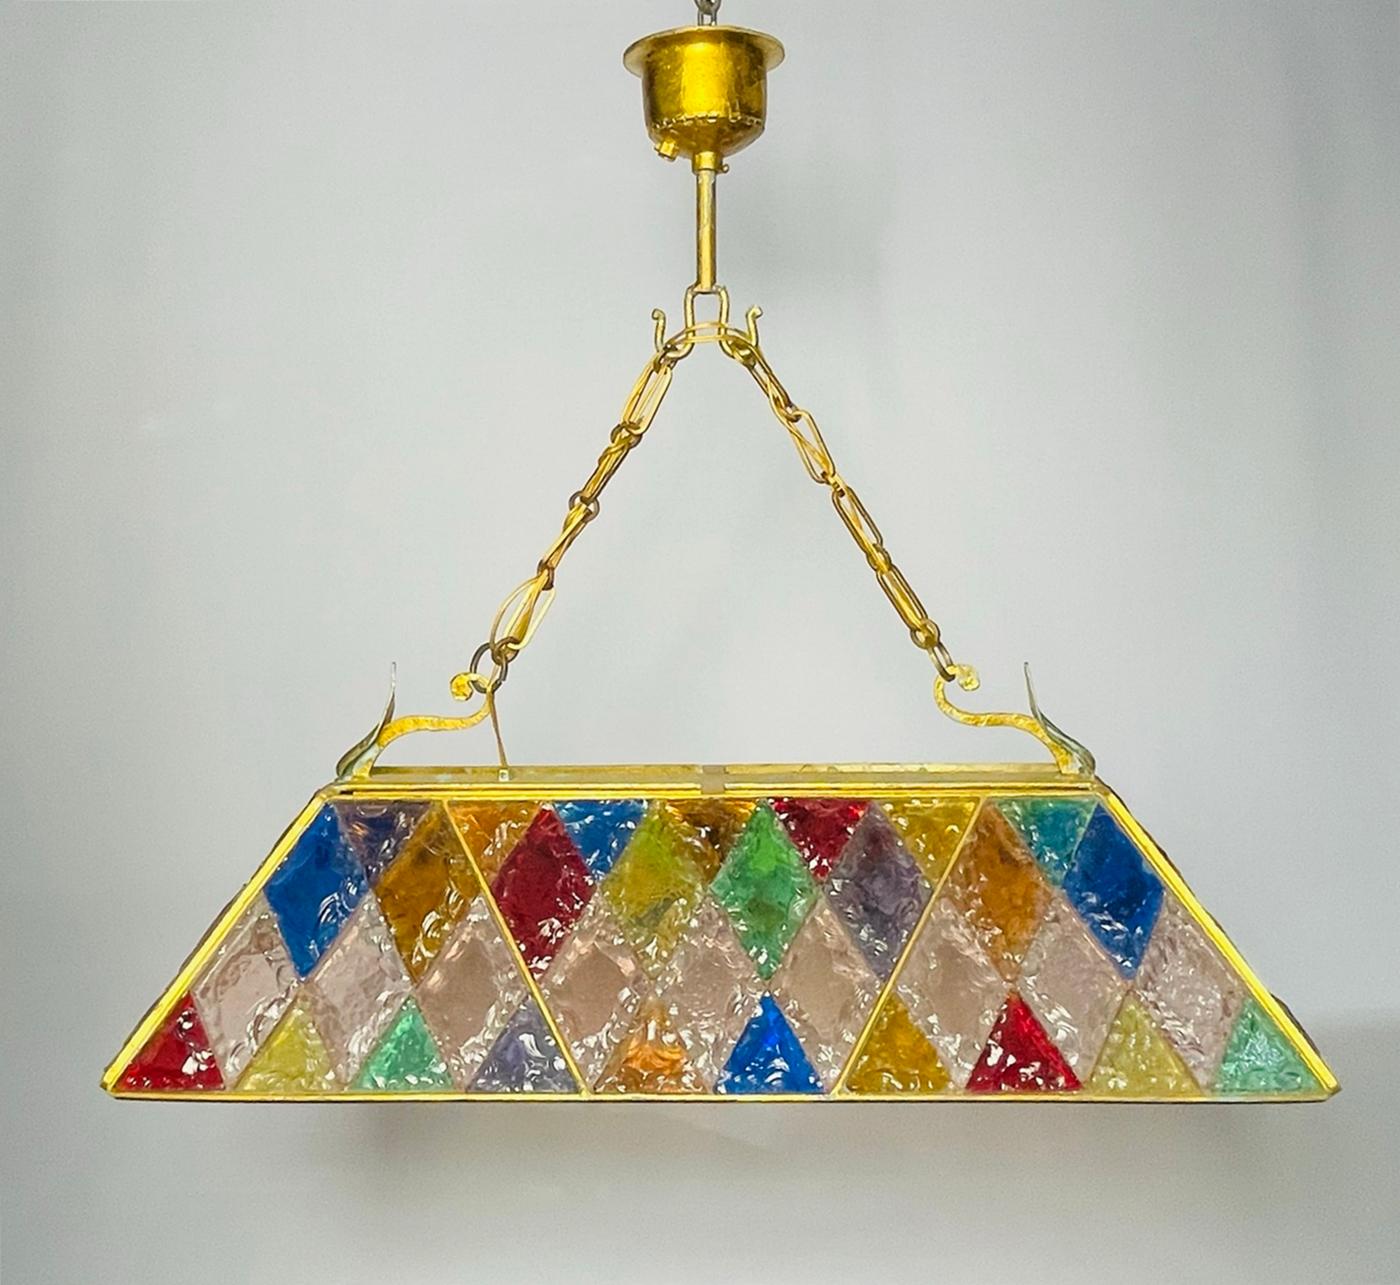 Italian Wrought Iron & Hammered Glass Chandelier by Longobard, Italy, 1970s For Sale